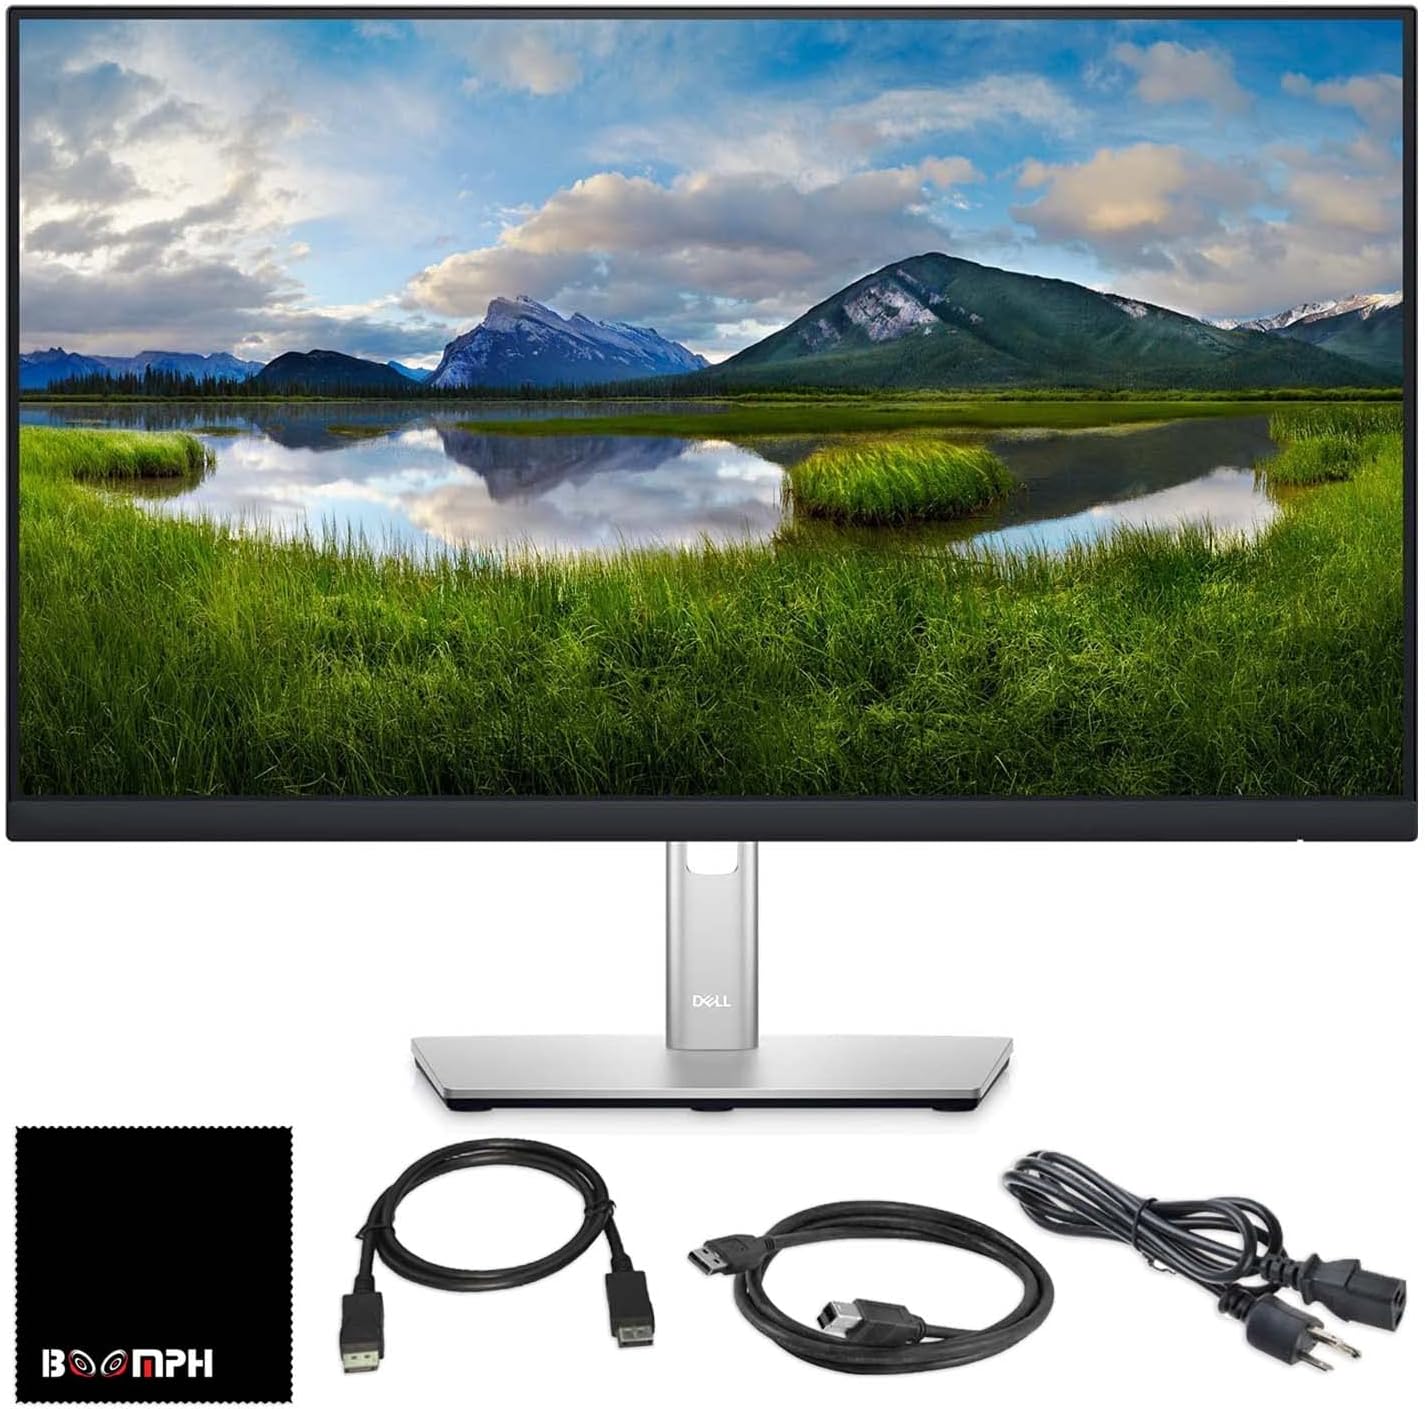 Dell P2422H 24" 16:9 IPS Computer Monitor Screen with Display Port Cable and USB 3.0 Upstream Cable - New Model